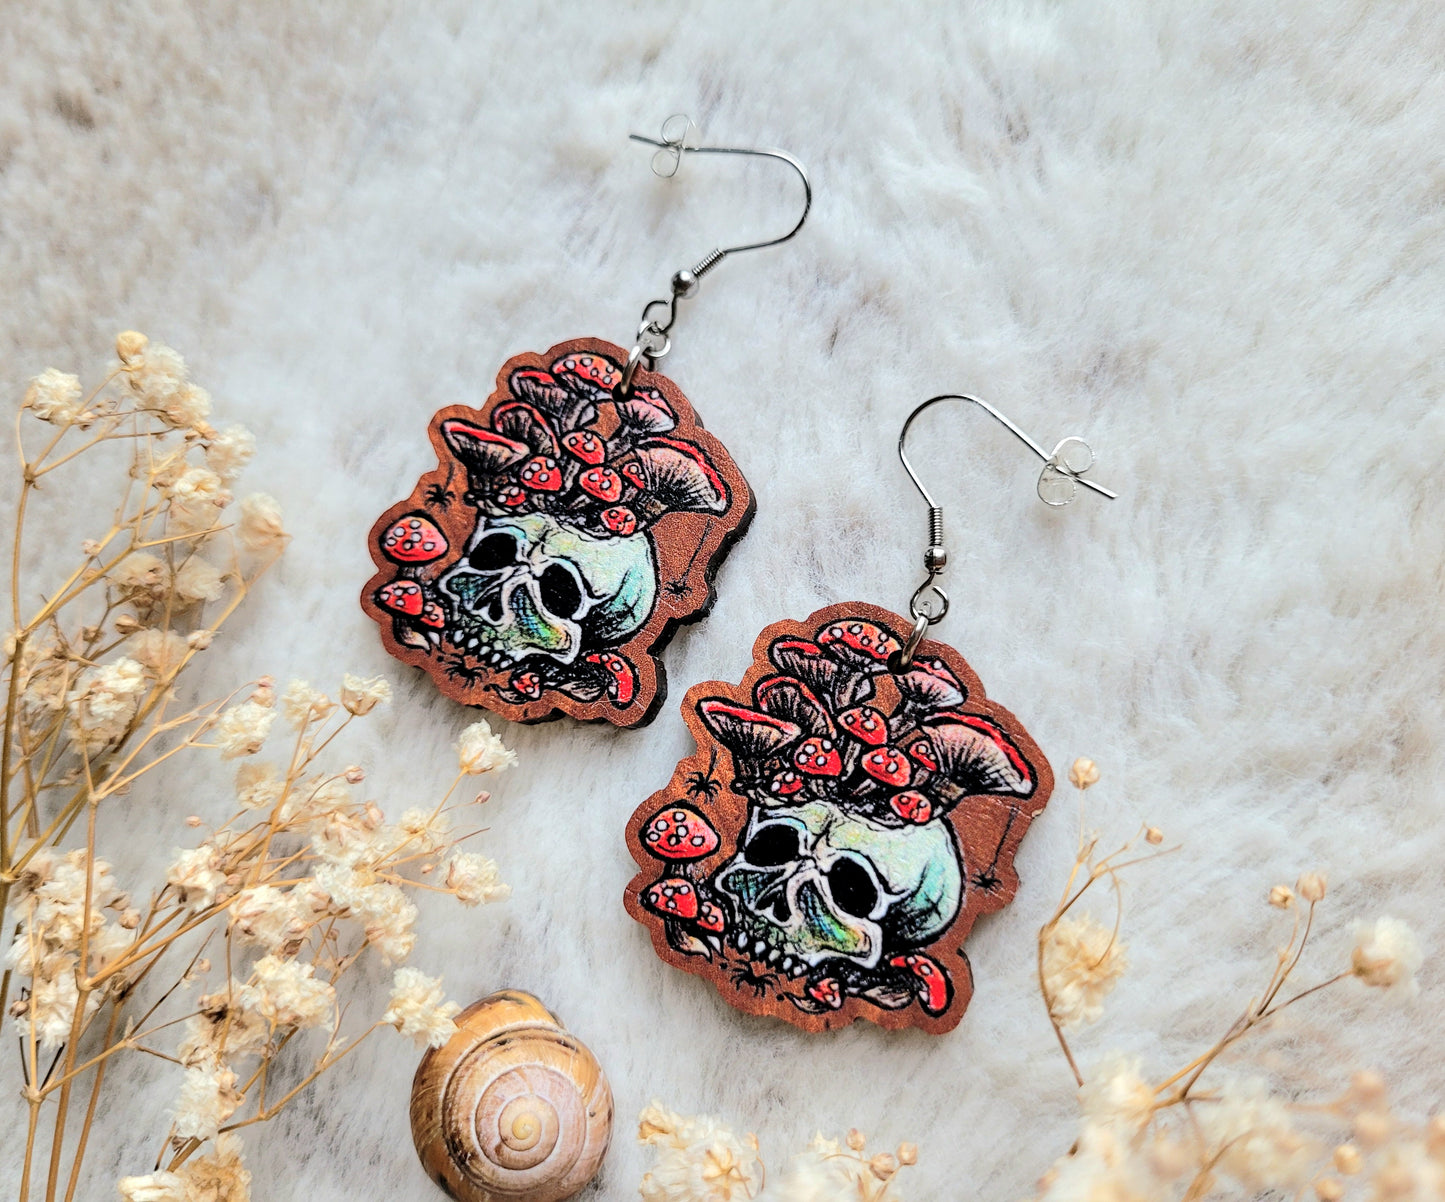 Mushroom Skull illustrated earrings, responsibly sourced cherry wood, 304 Stainless Steel hooks, by Grace Moth